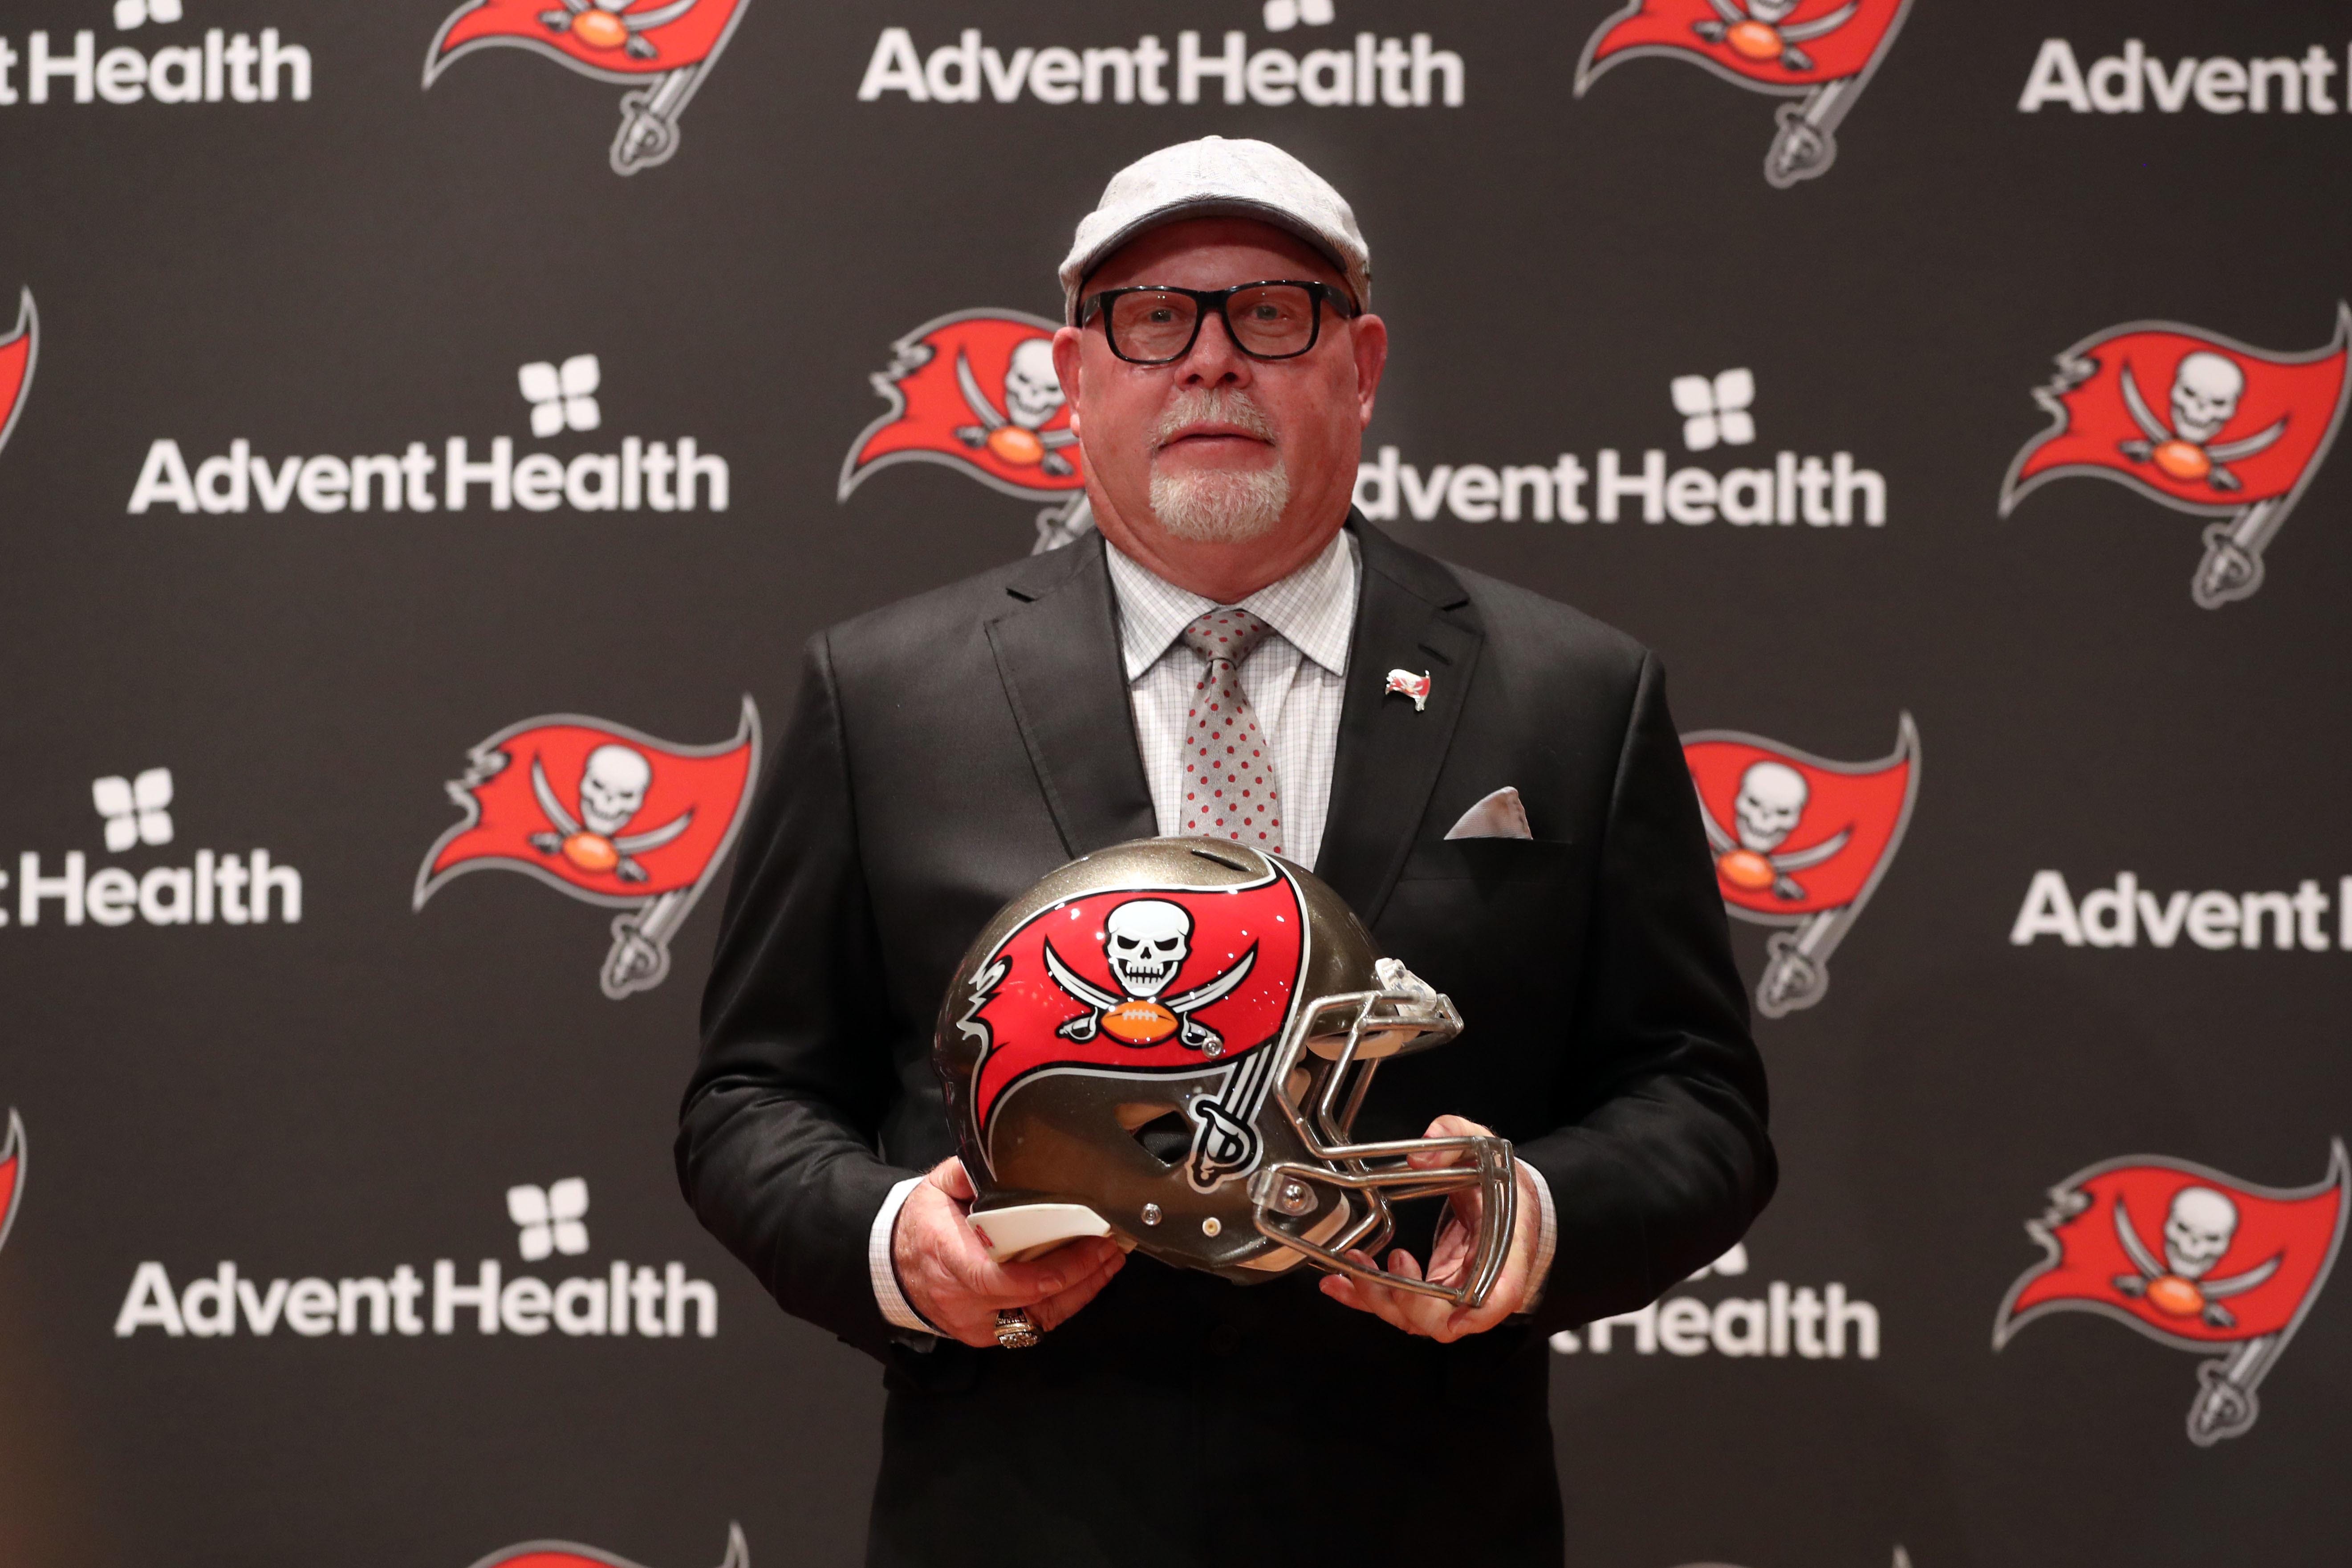 Bruce Arians, age 66, at 'last hurrah' with Tampa Bay, wife says